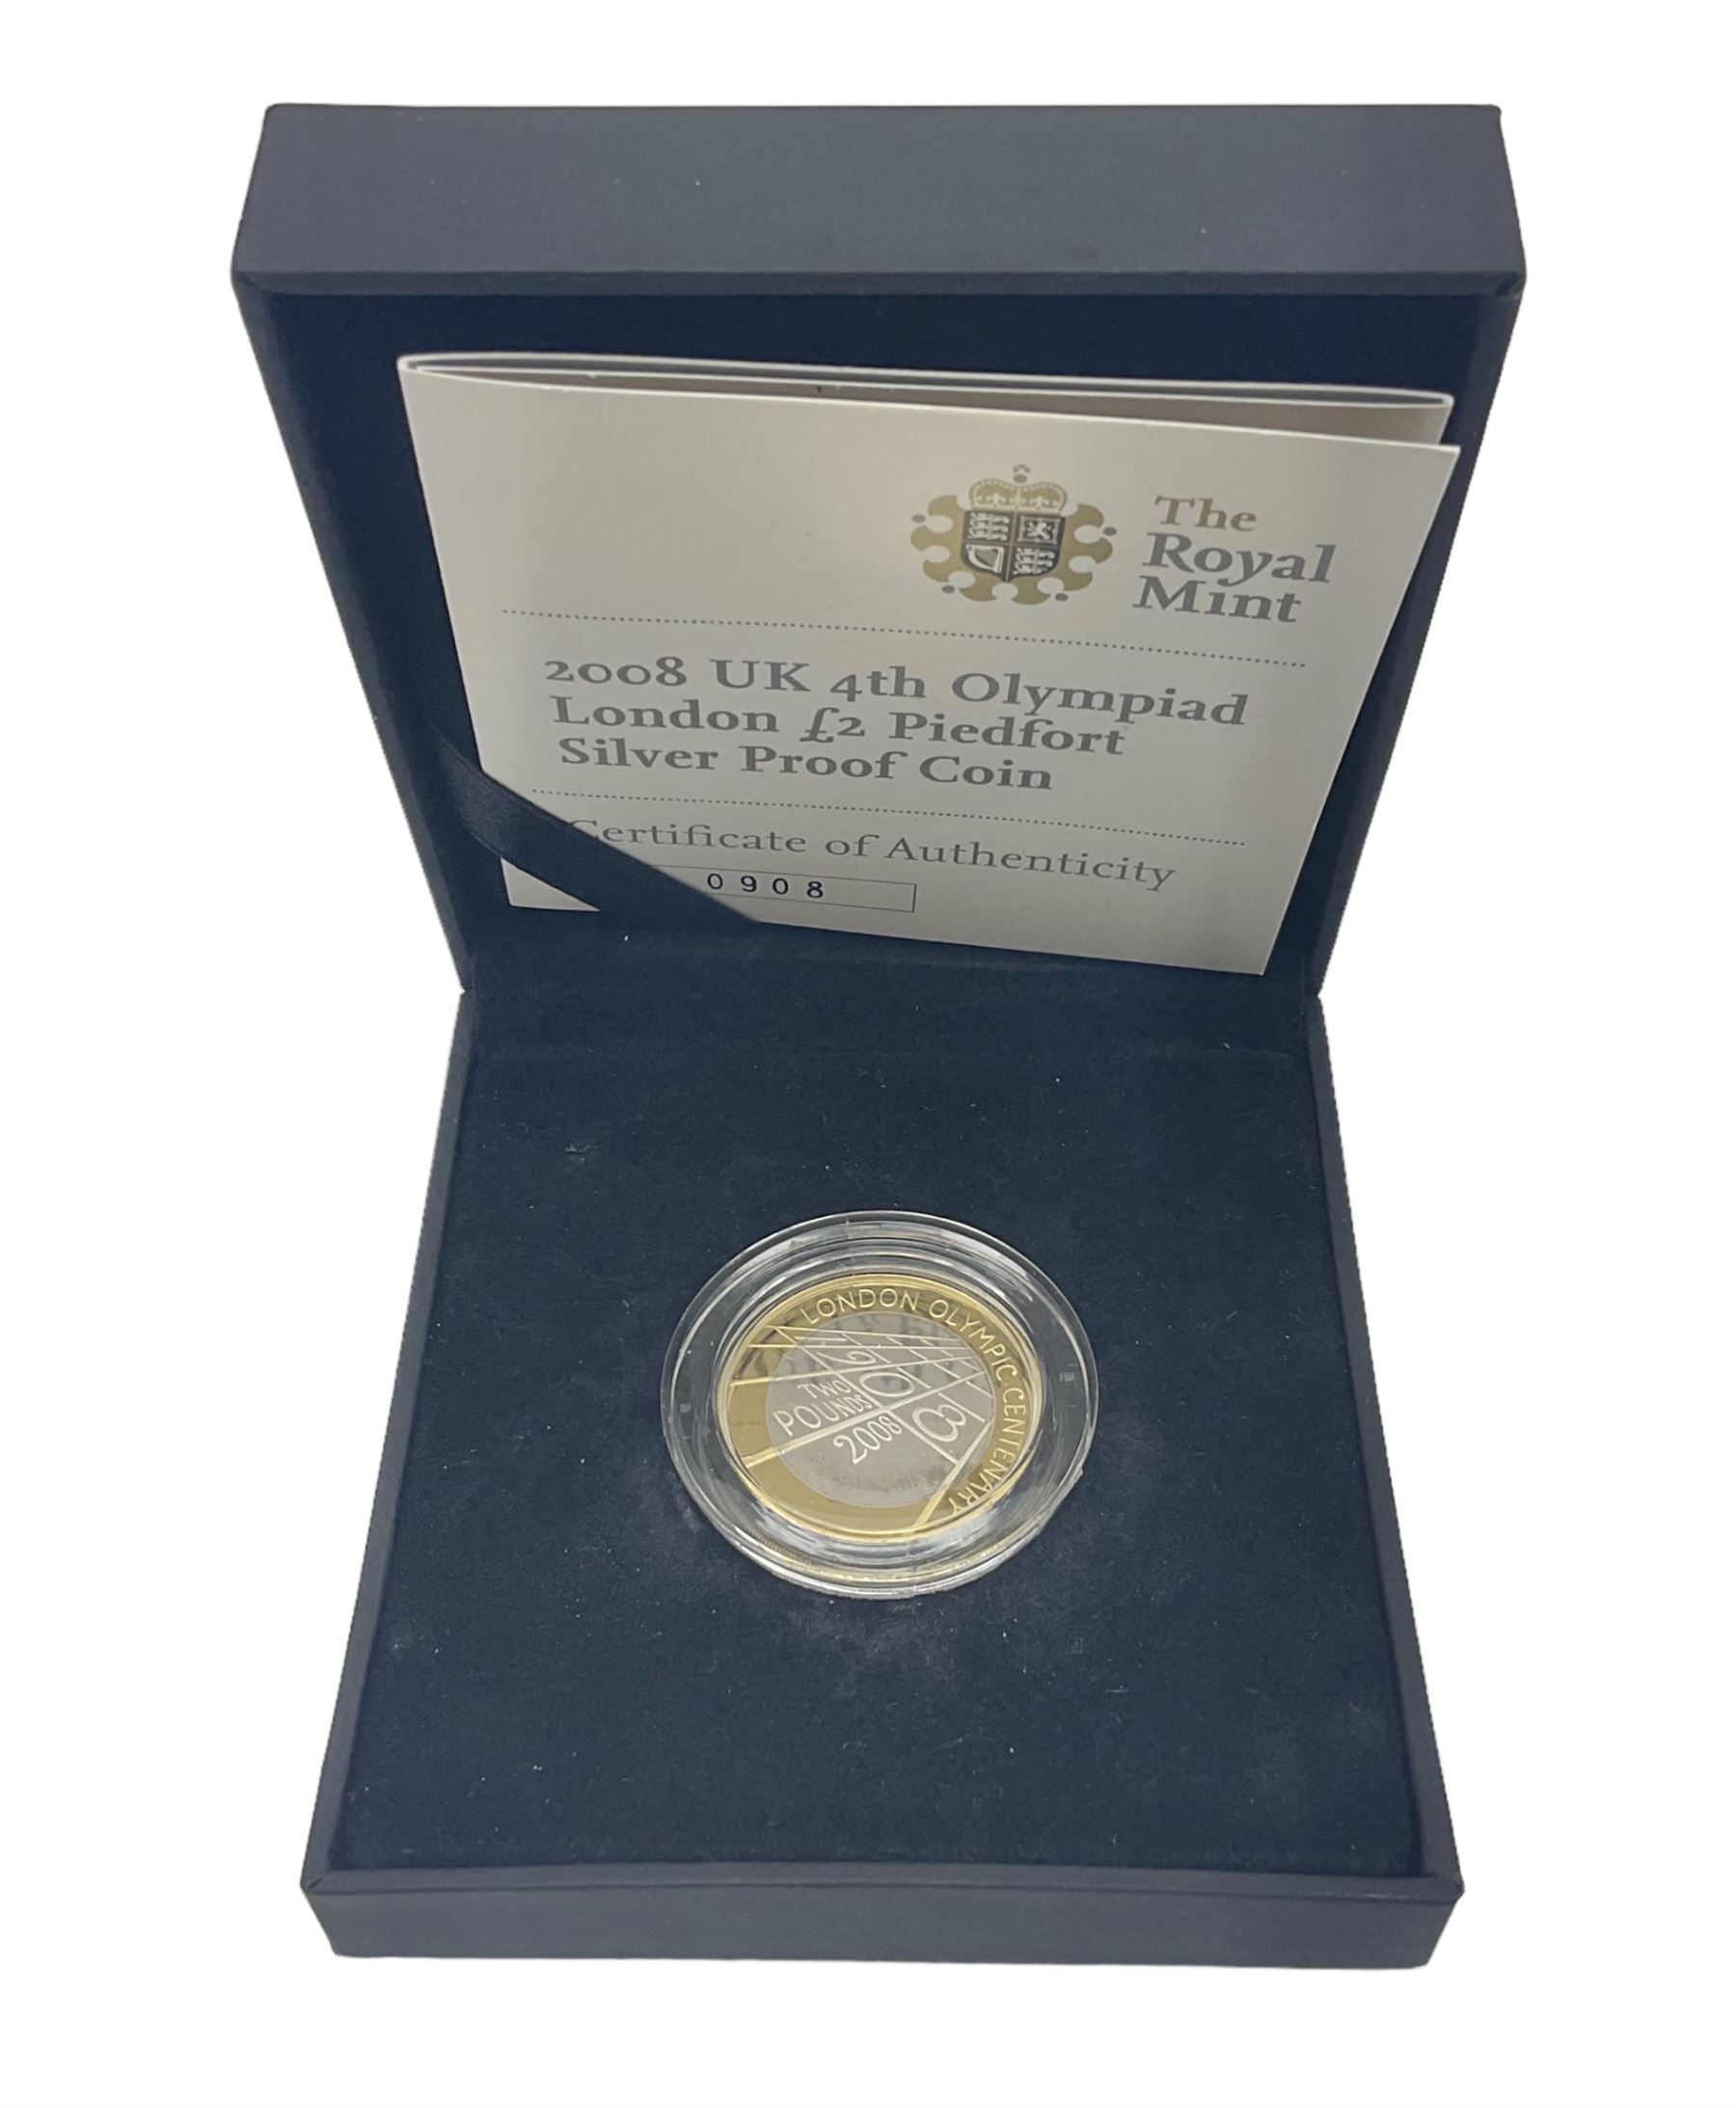 The Royal Mint United Kingdom 2010 ''4th Olympiad London' silver proof piedfort two pound coin